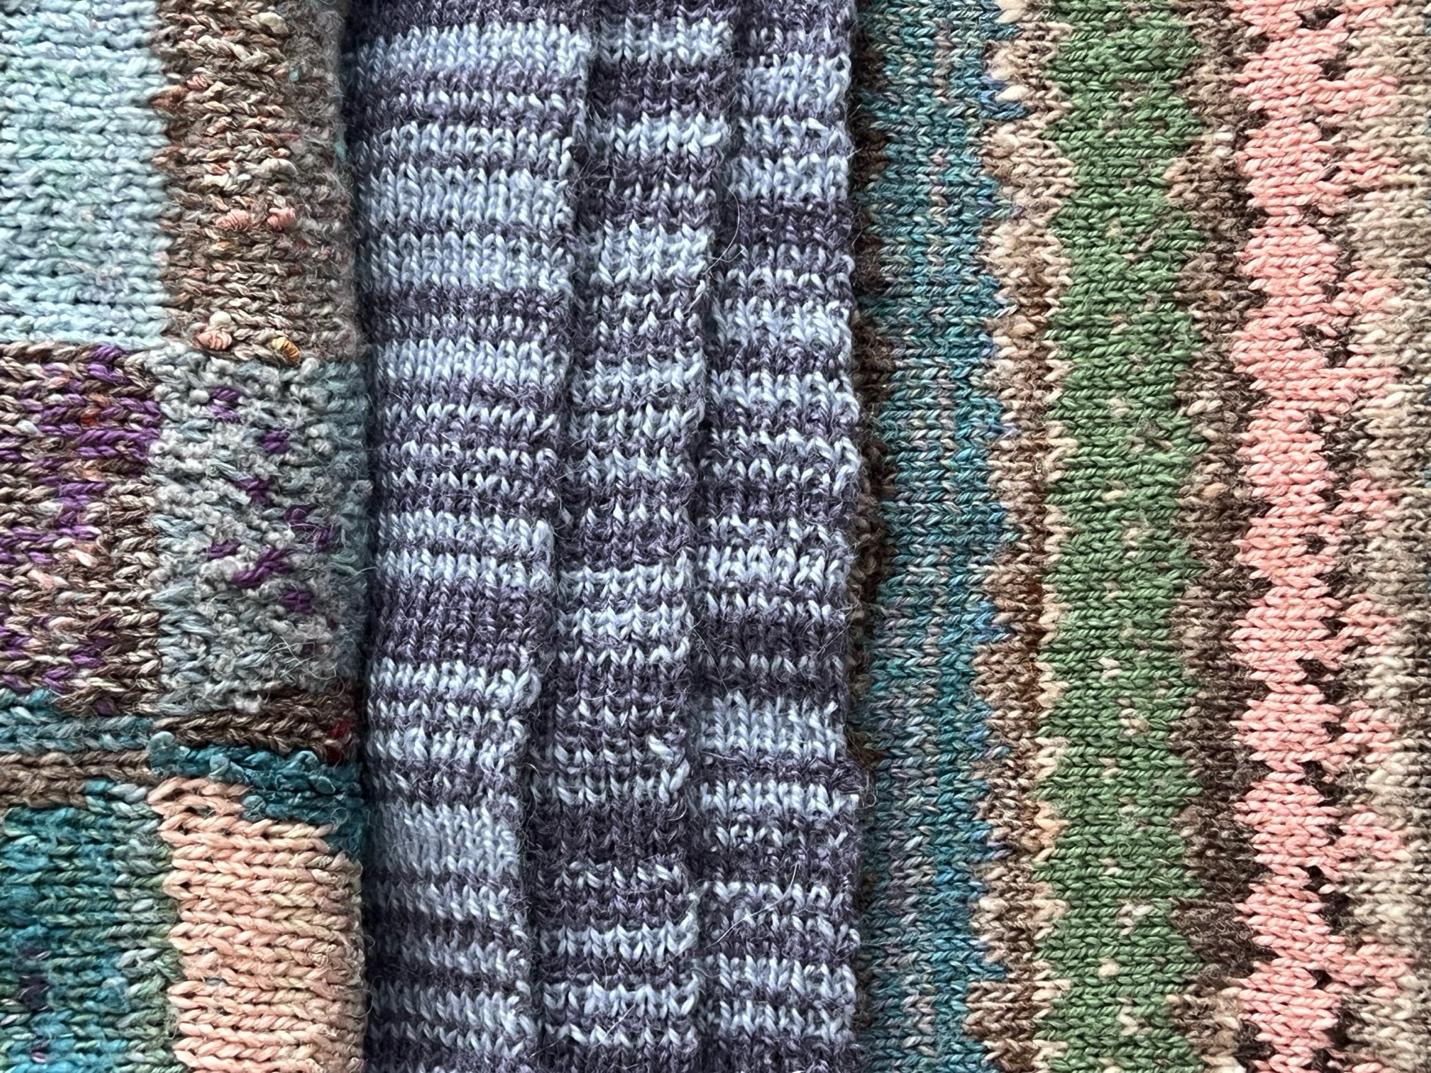 A close up of a pile of knitted fabric

Description automatically generated